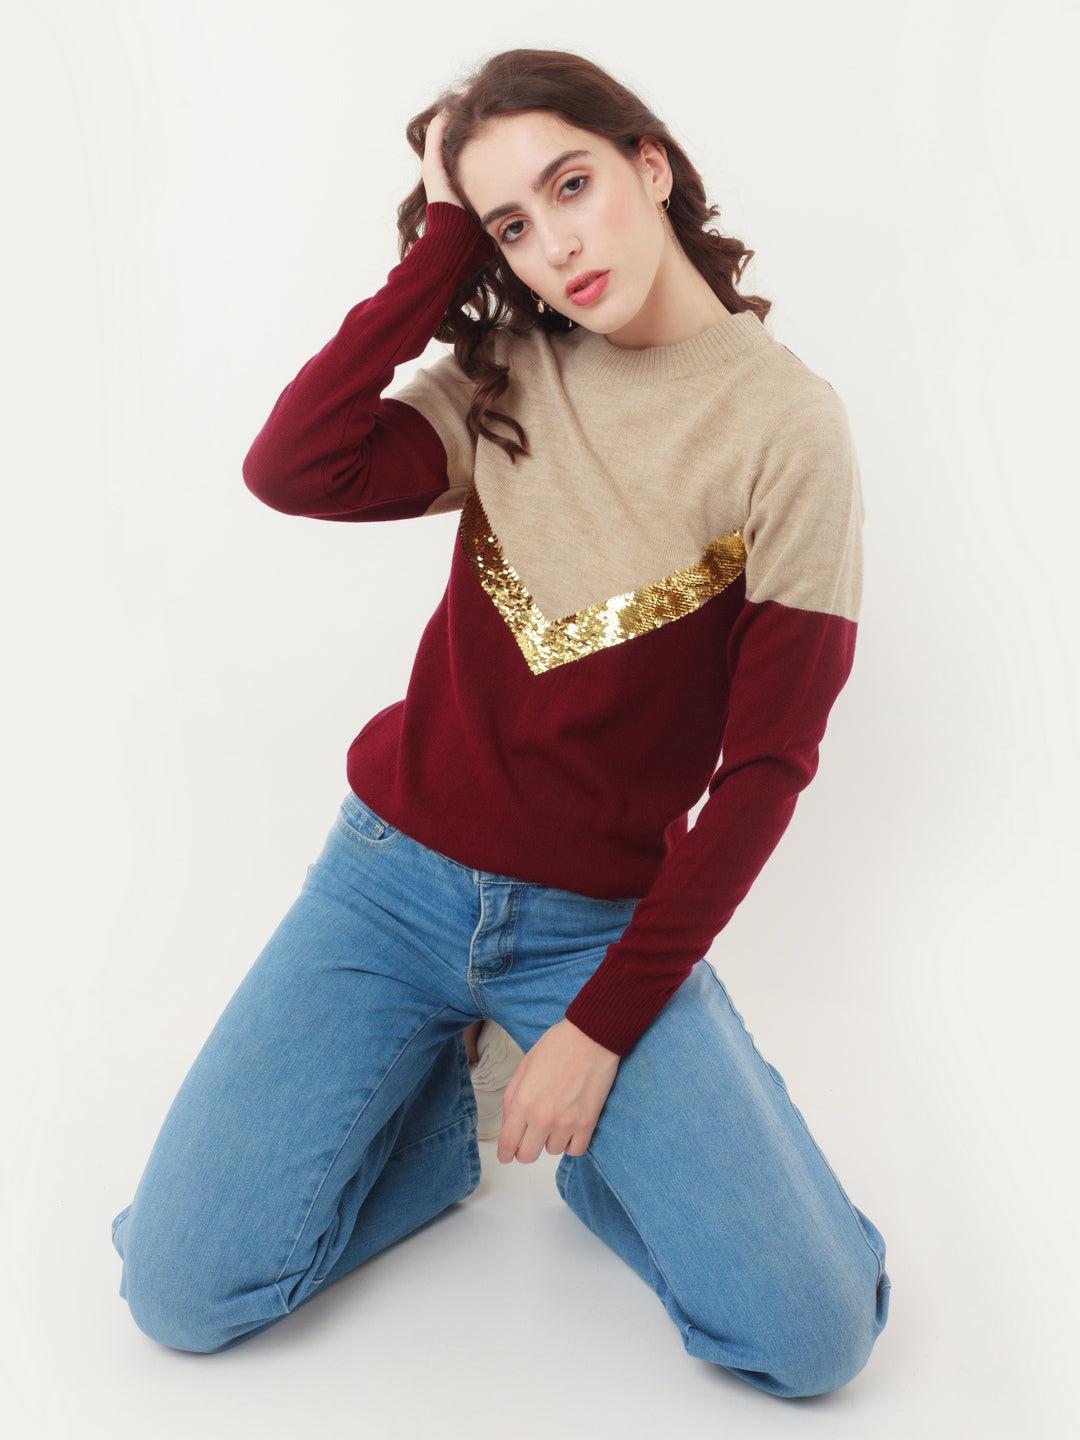 Multicolored Embellished Sweater For Women